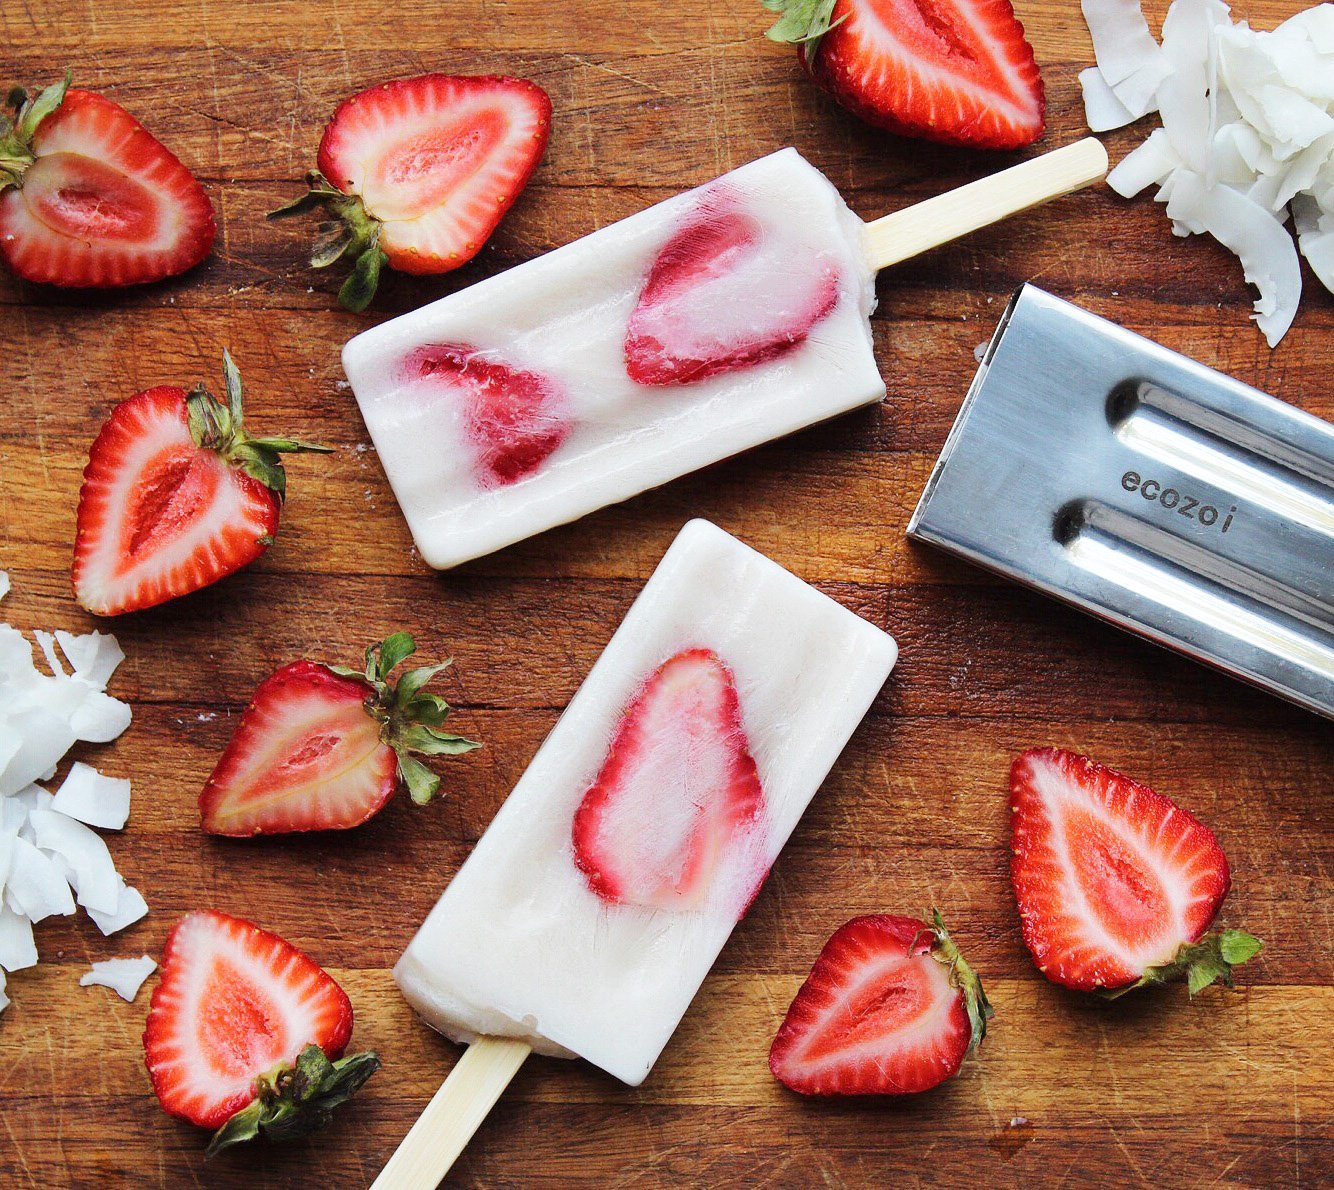 New Freezycup Stainless Steel Popsicle Molds Use Less Space in the Freezer  » My Plastic-free Life